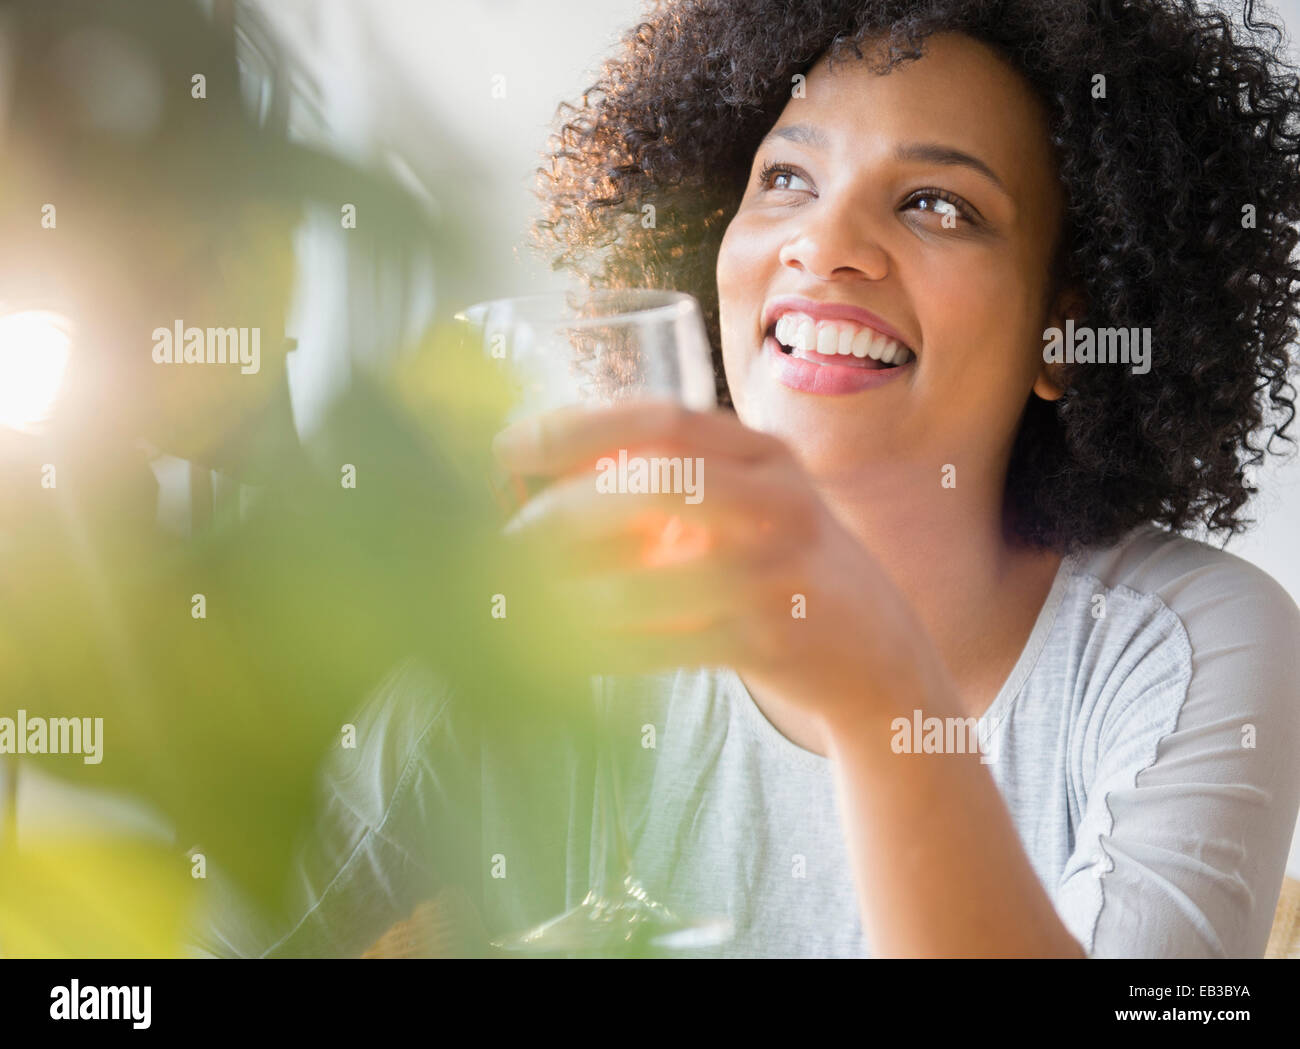 Smiling woman drinking glass of wine Stock Photo